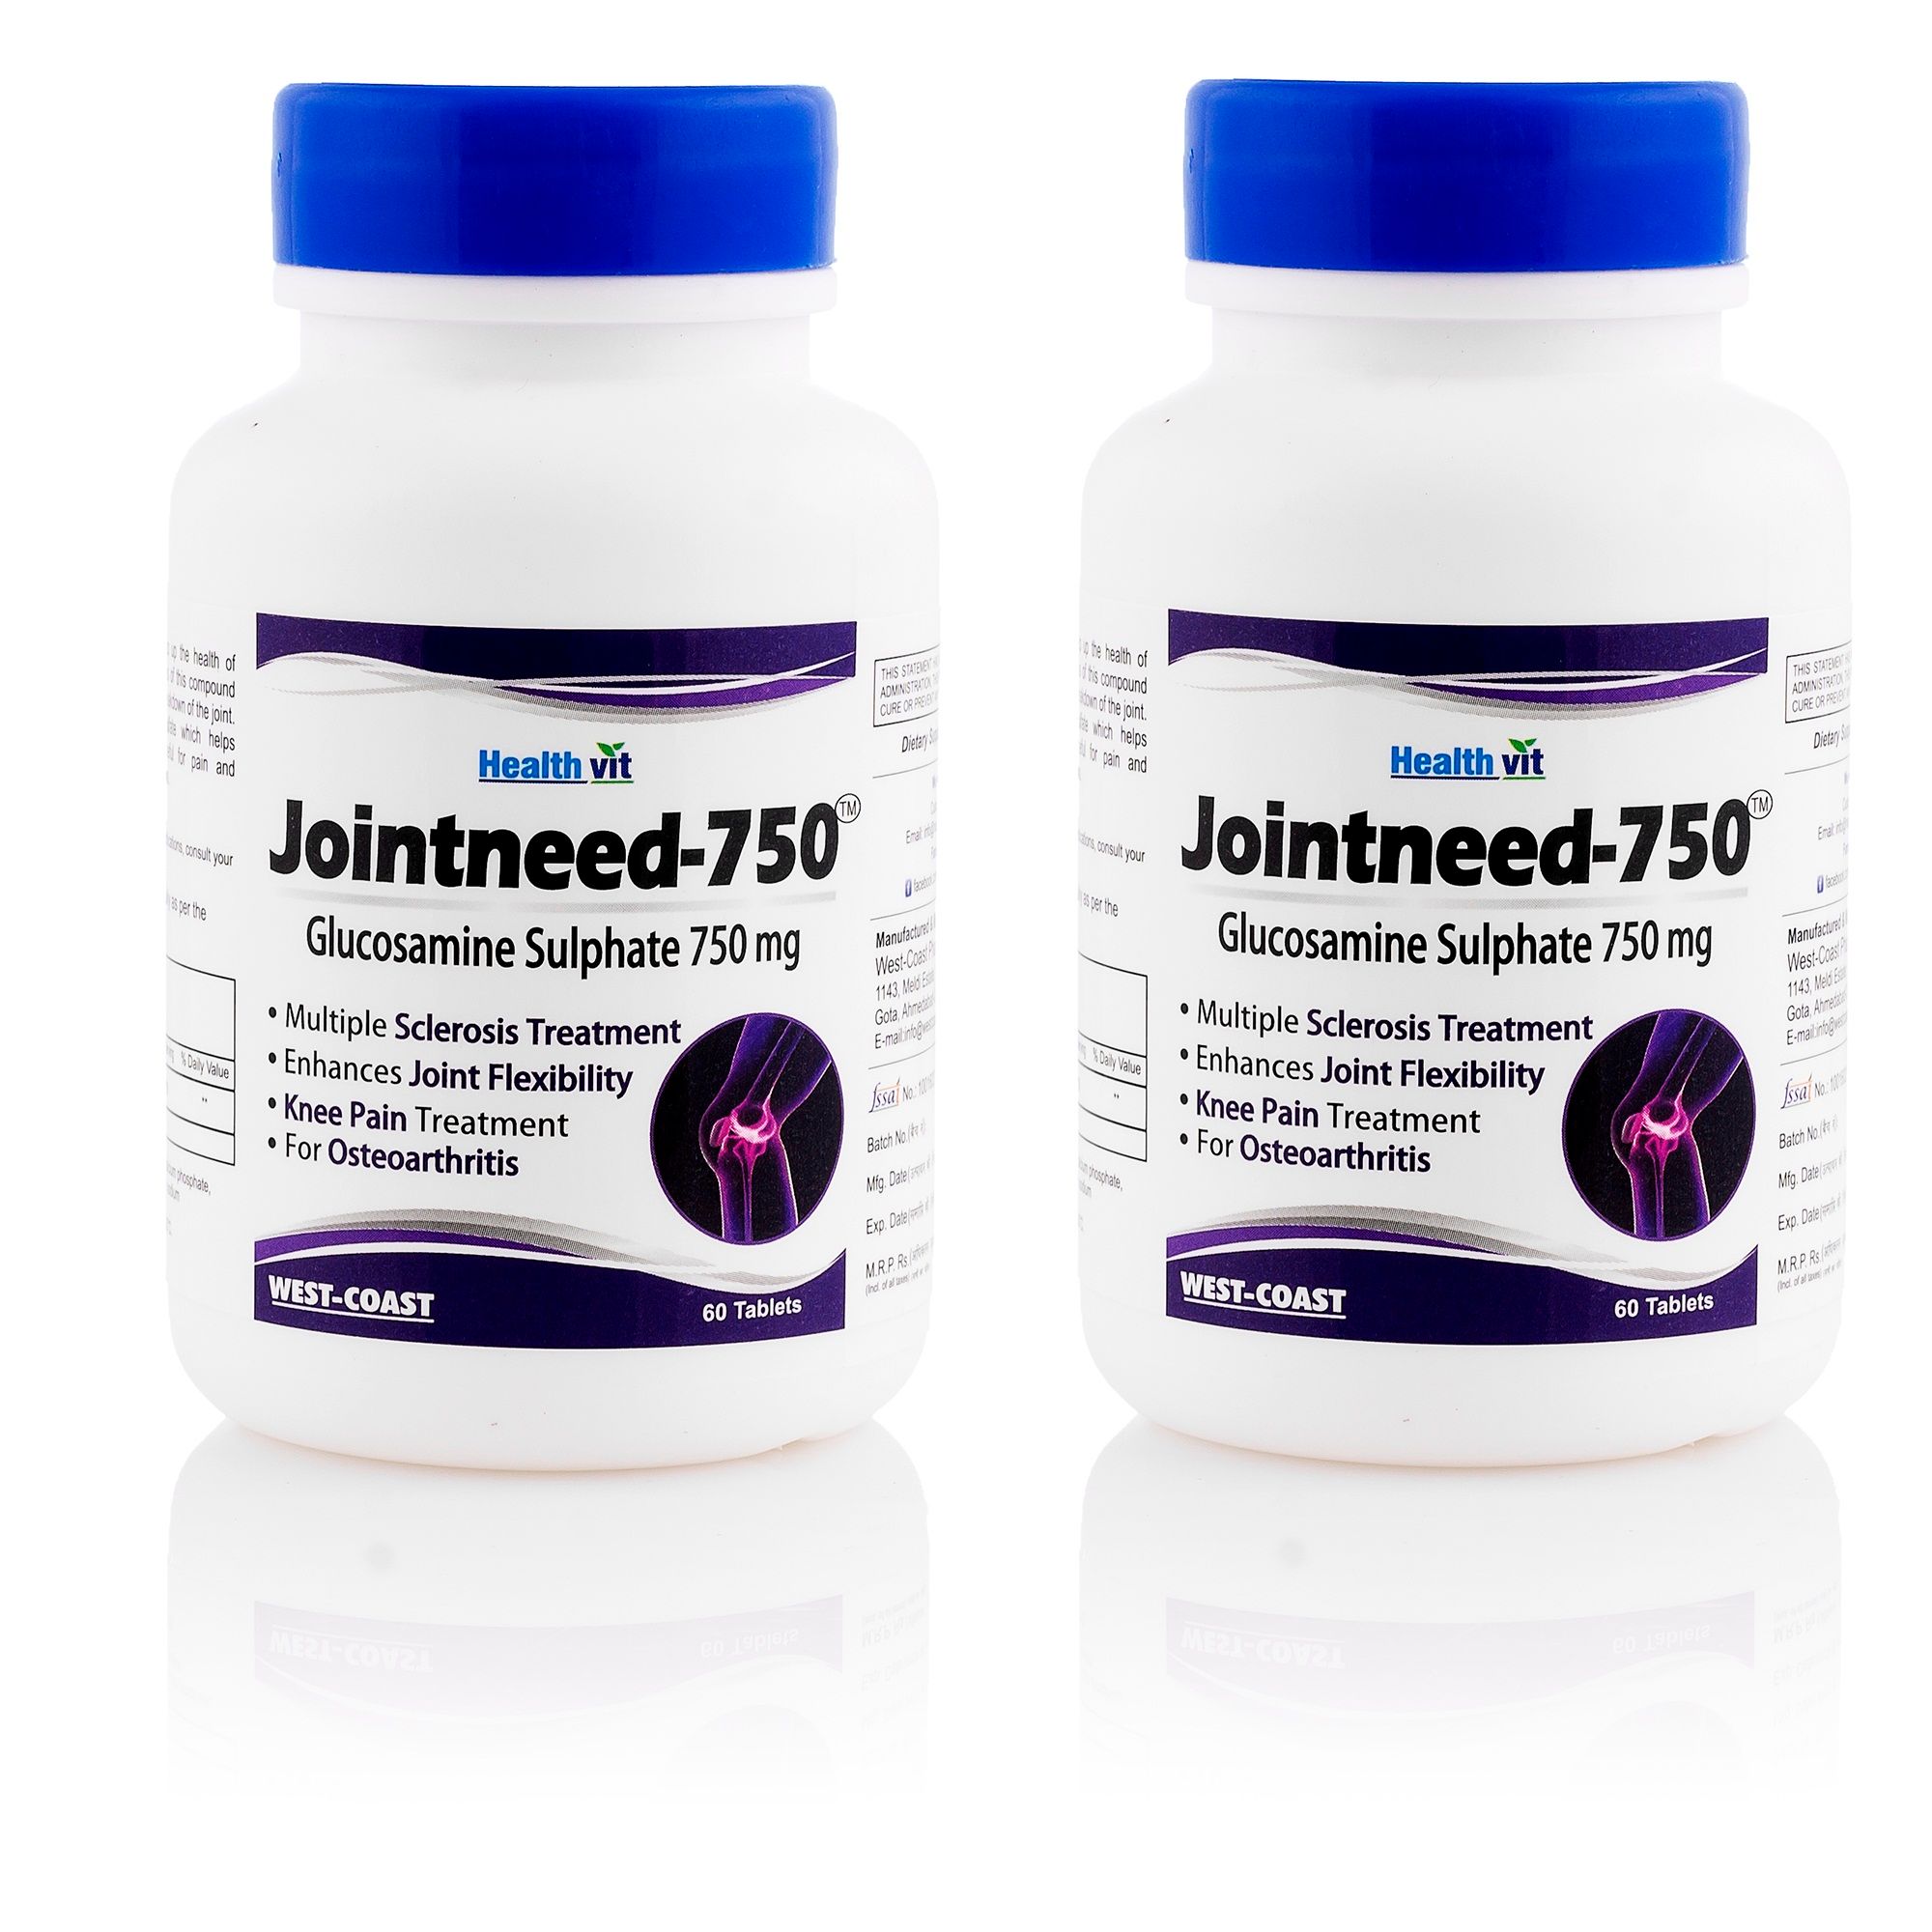 Healthvit Jointneed 750 Glucosamine Sulphate Tablets (Pack of 2)